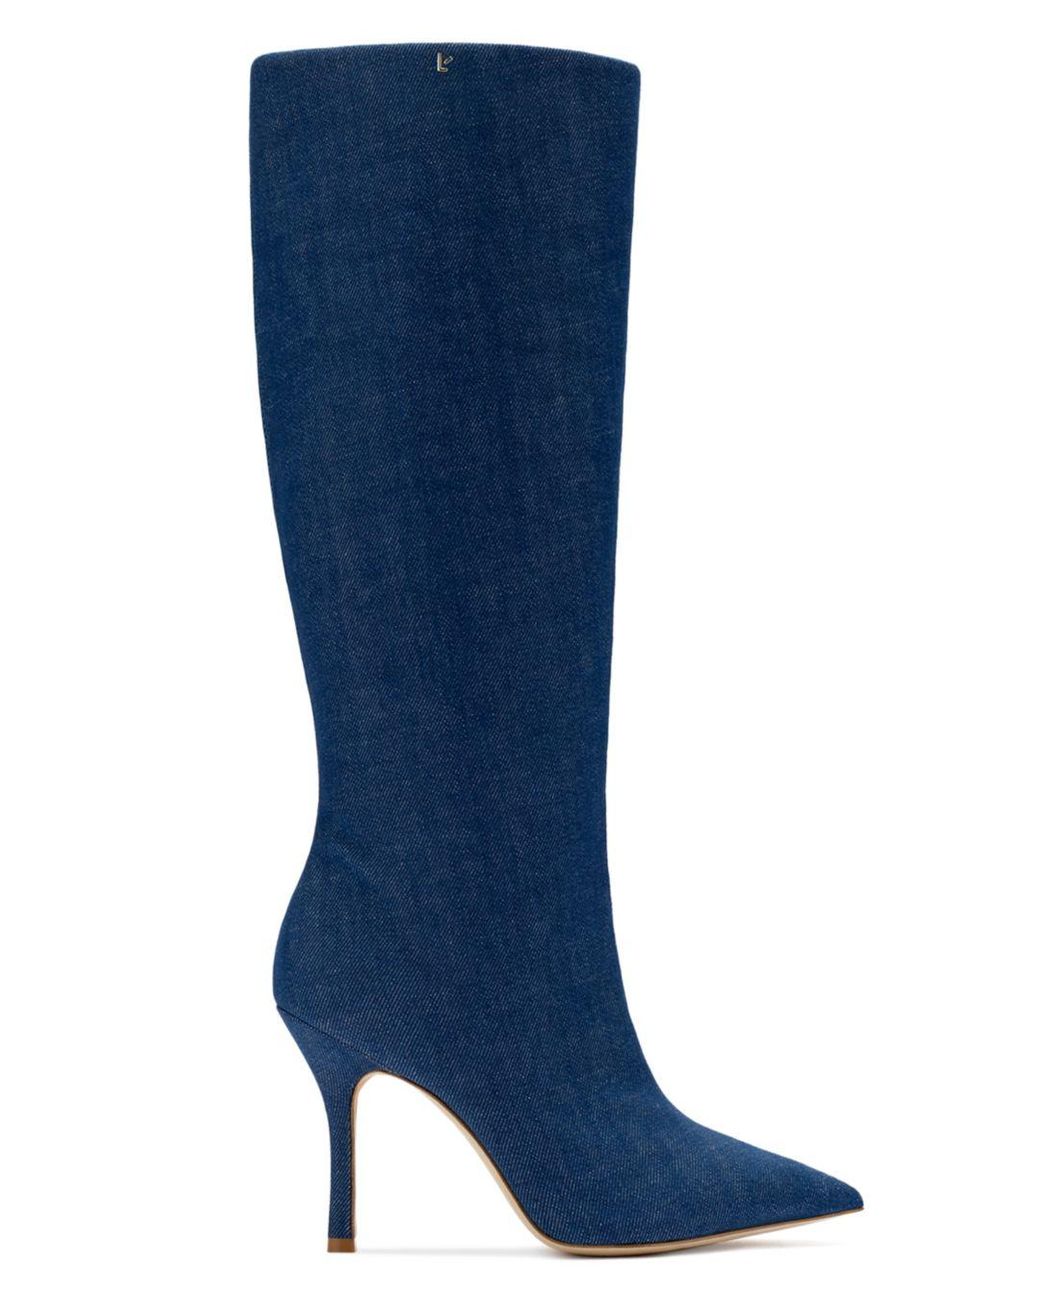 Larroude Kate Pointed Toe High Heel Boots in Blue | Lyst